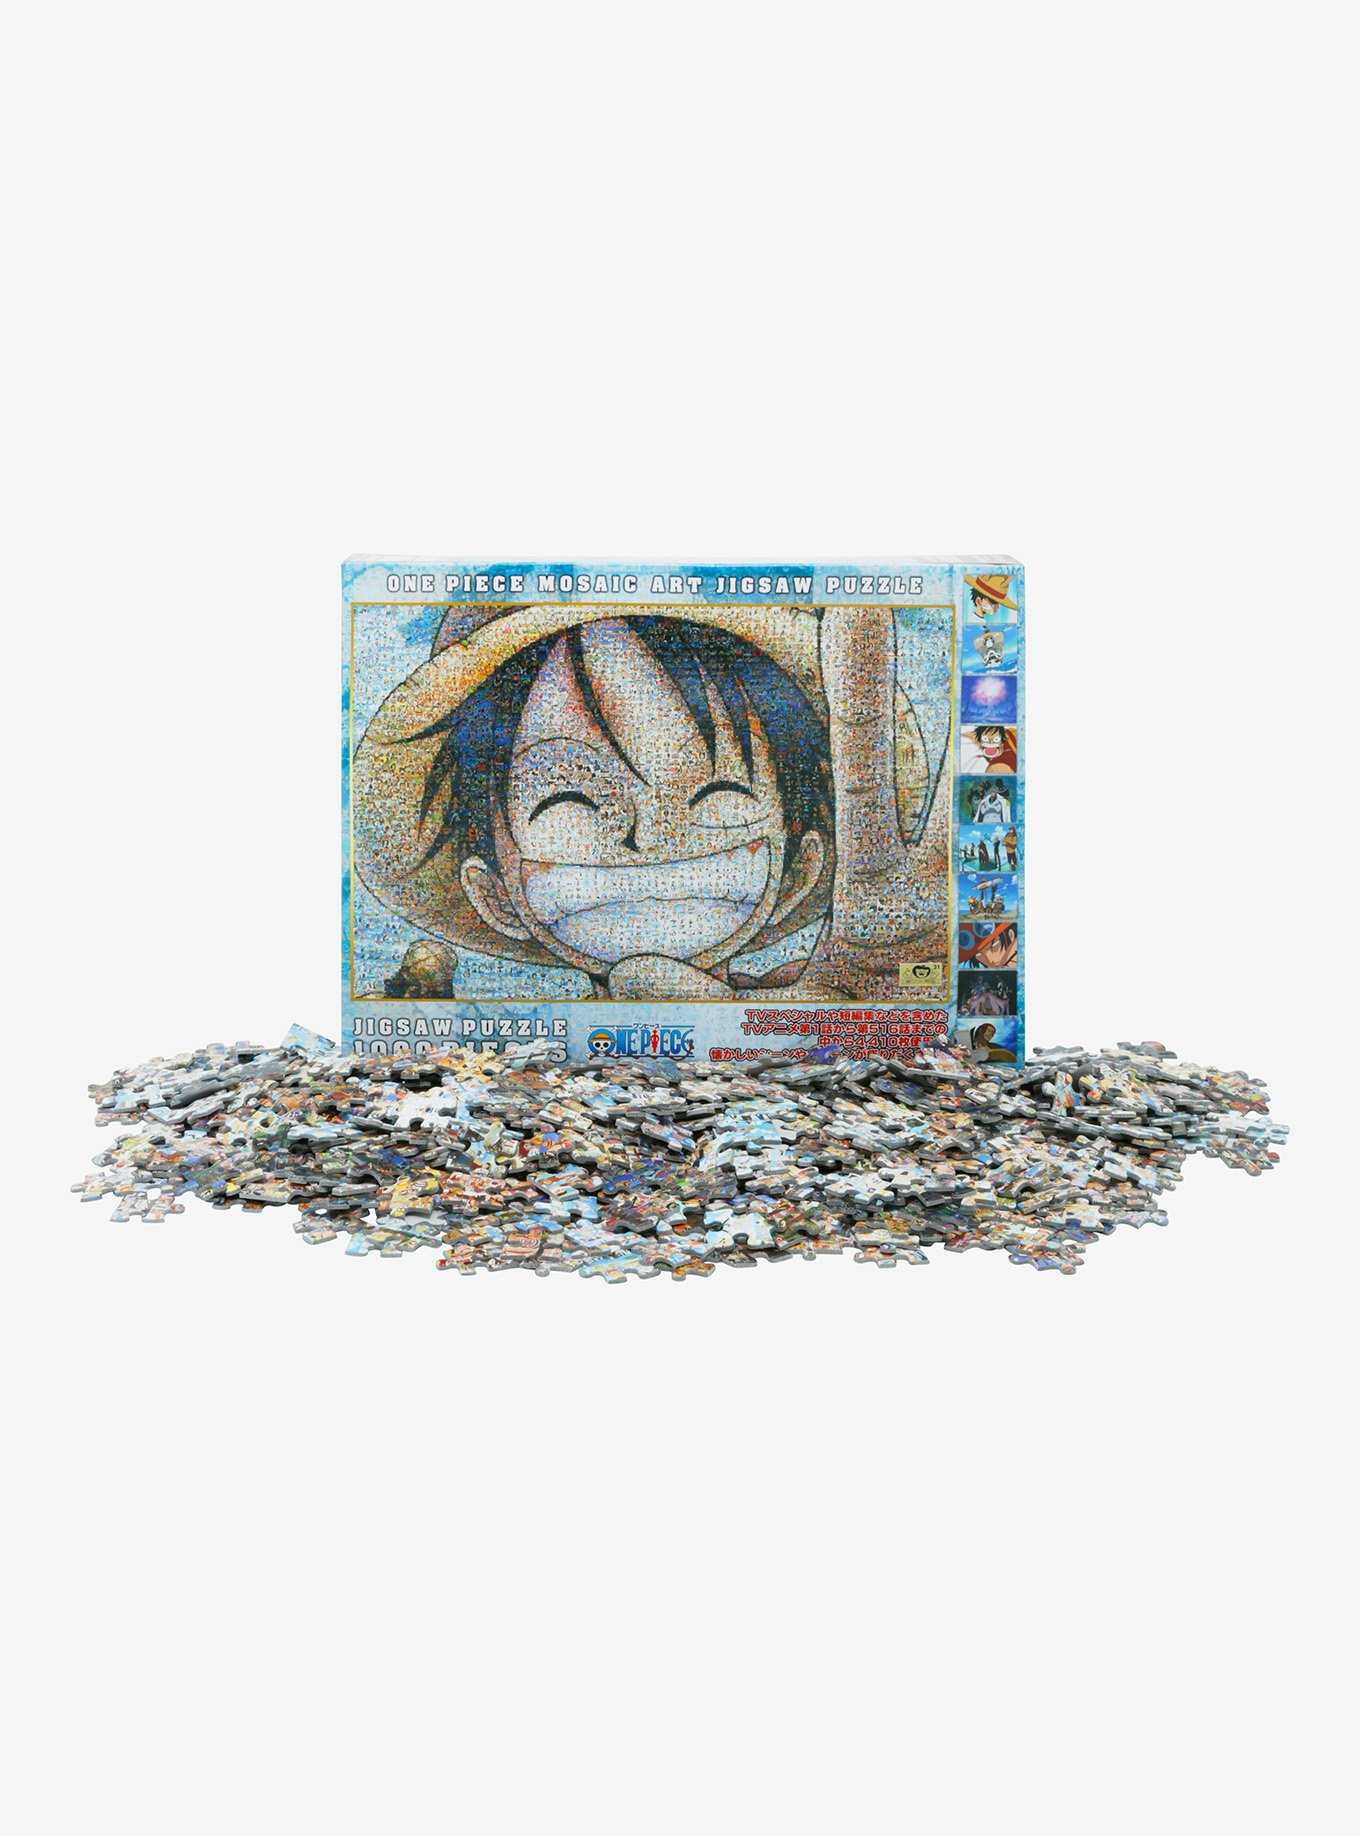 One Piece Luffy Mosaic Art Puzzle, , hi-res